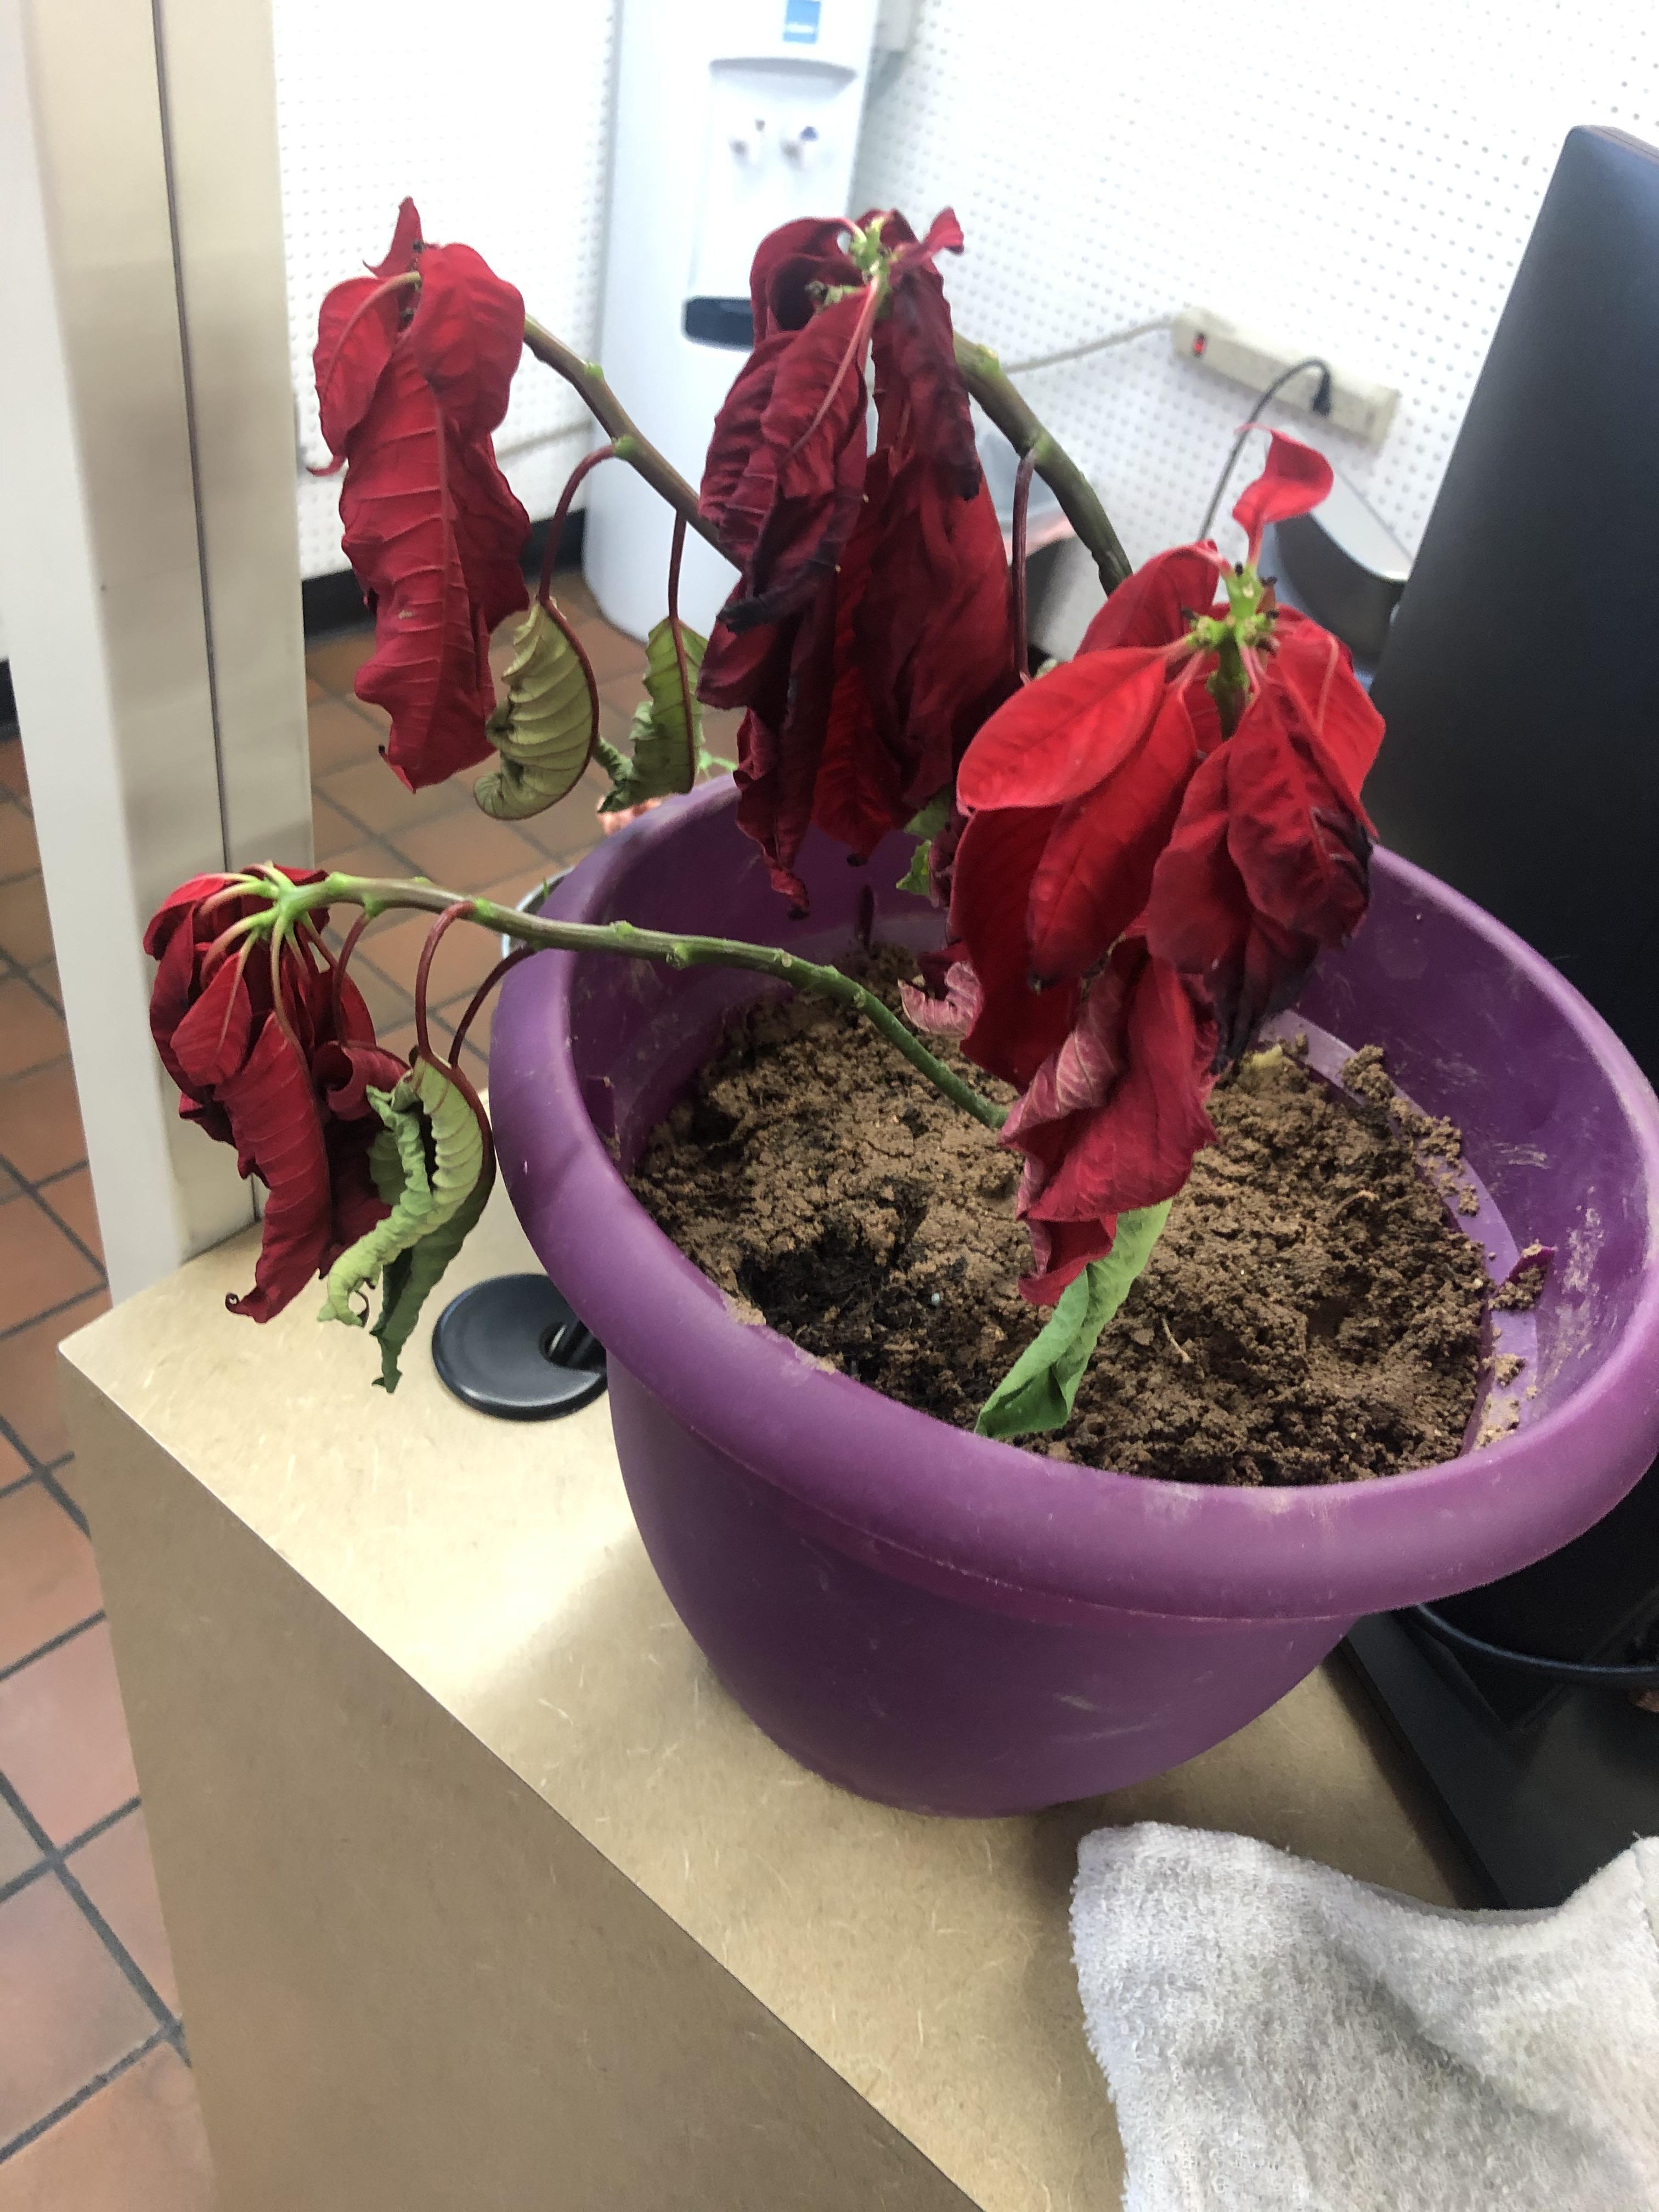 How to Revive a Wilted Poinsettia